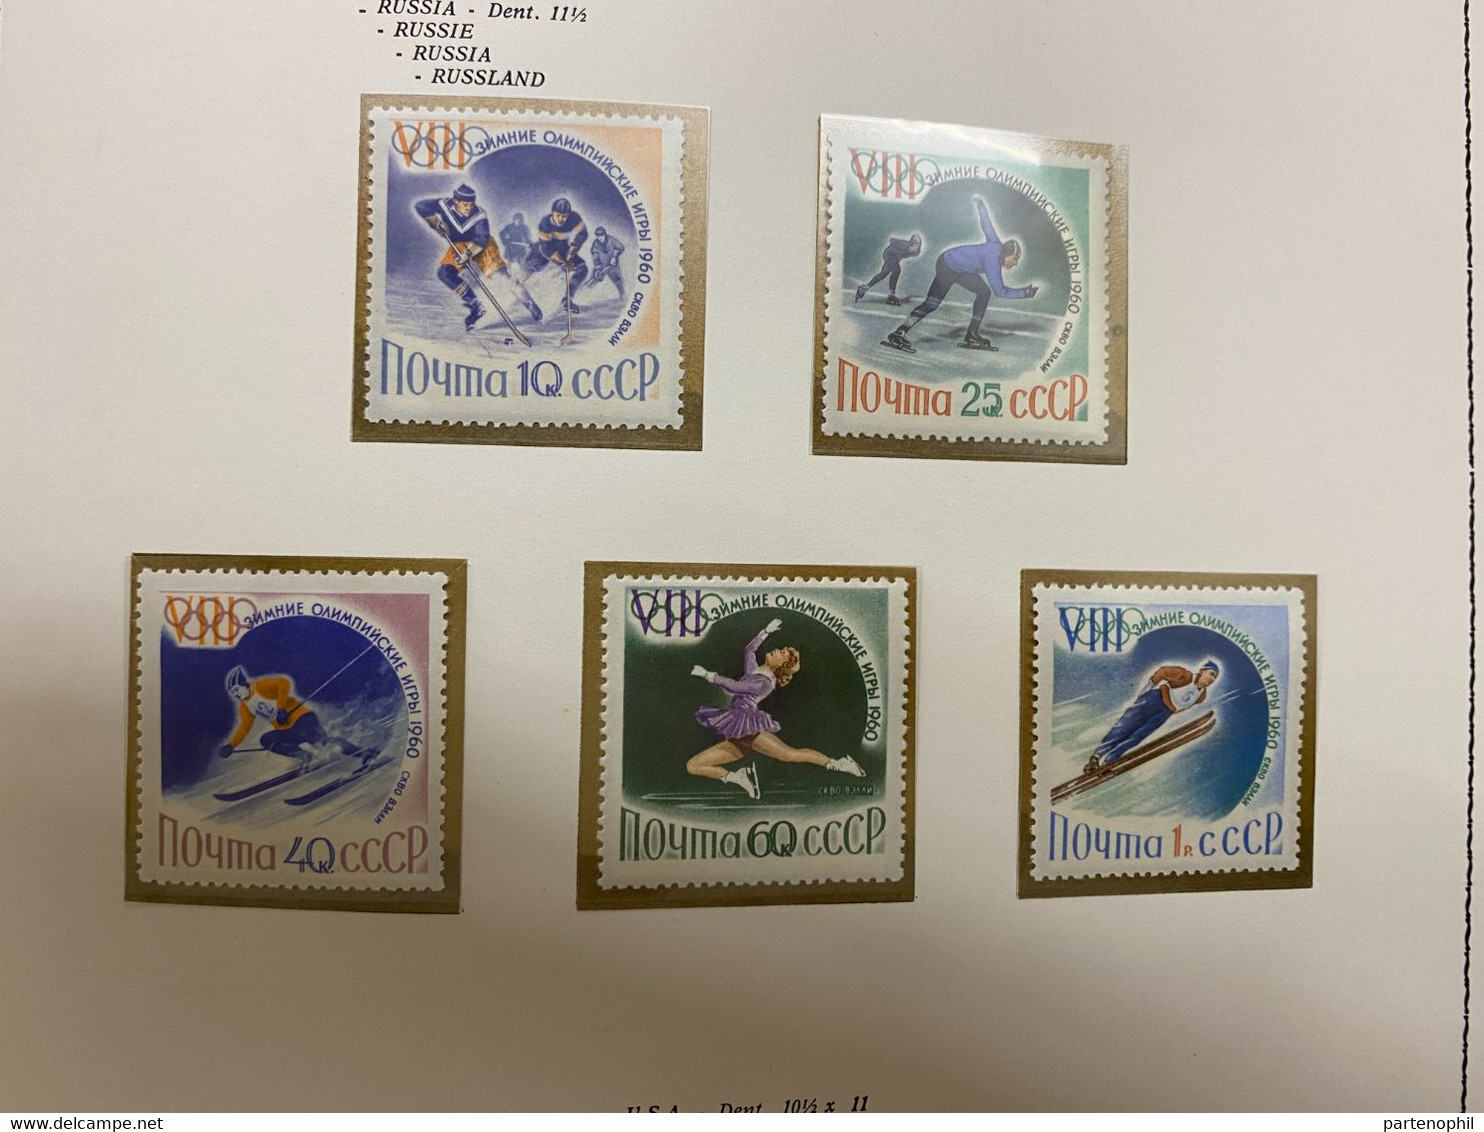 Russia - Squaw Valley 1960 - Winter Olimpic Games / Sports / Giochi Olimpici - Set MNH - Inverno1960: Squaw Valley